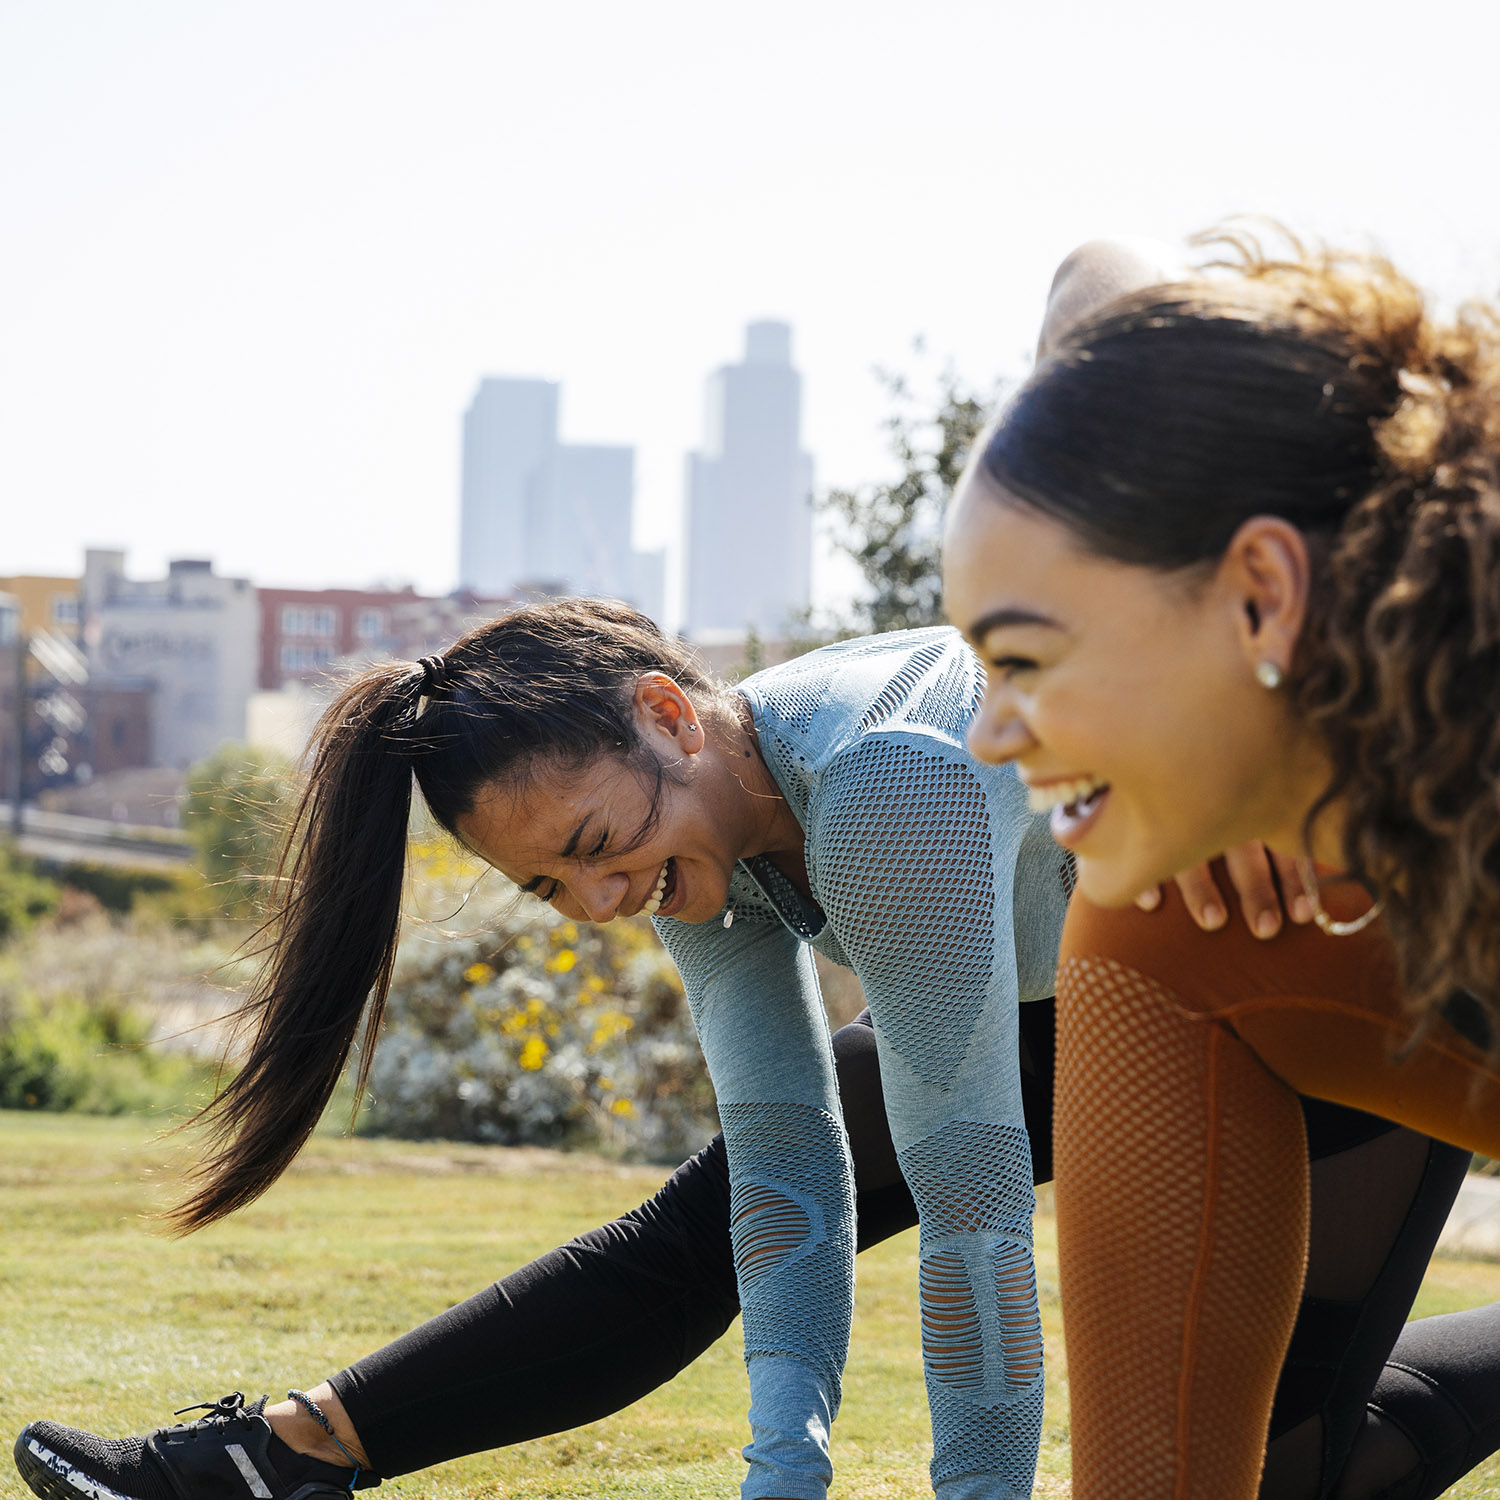 16 Best Outdoor Workouts for Women